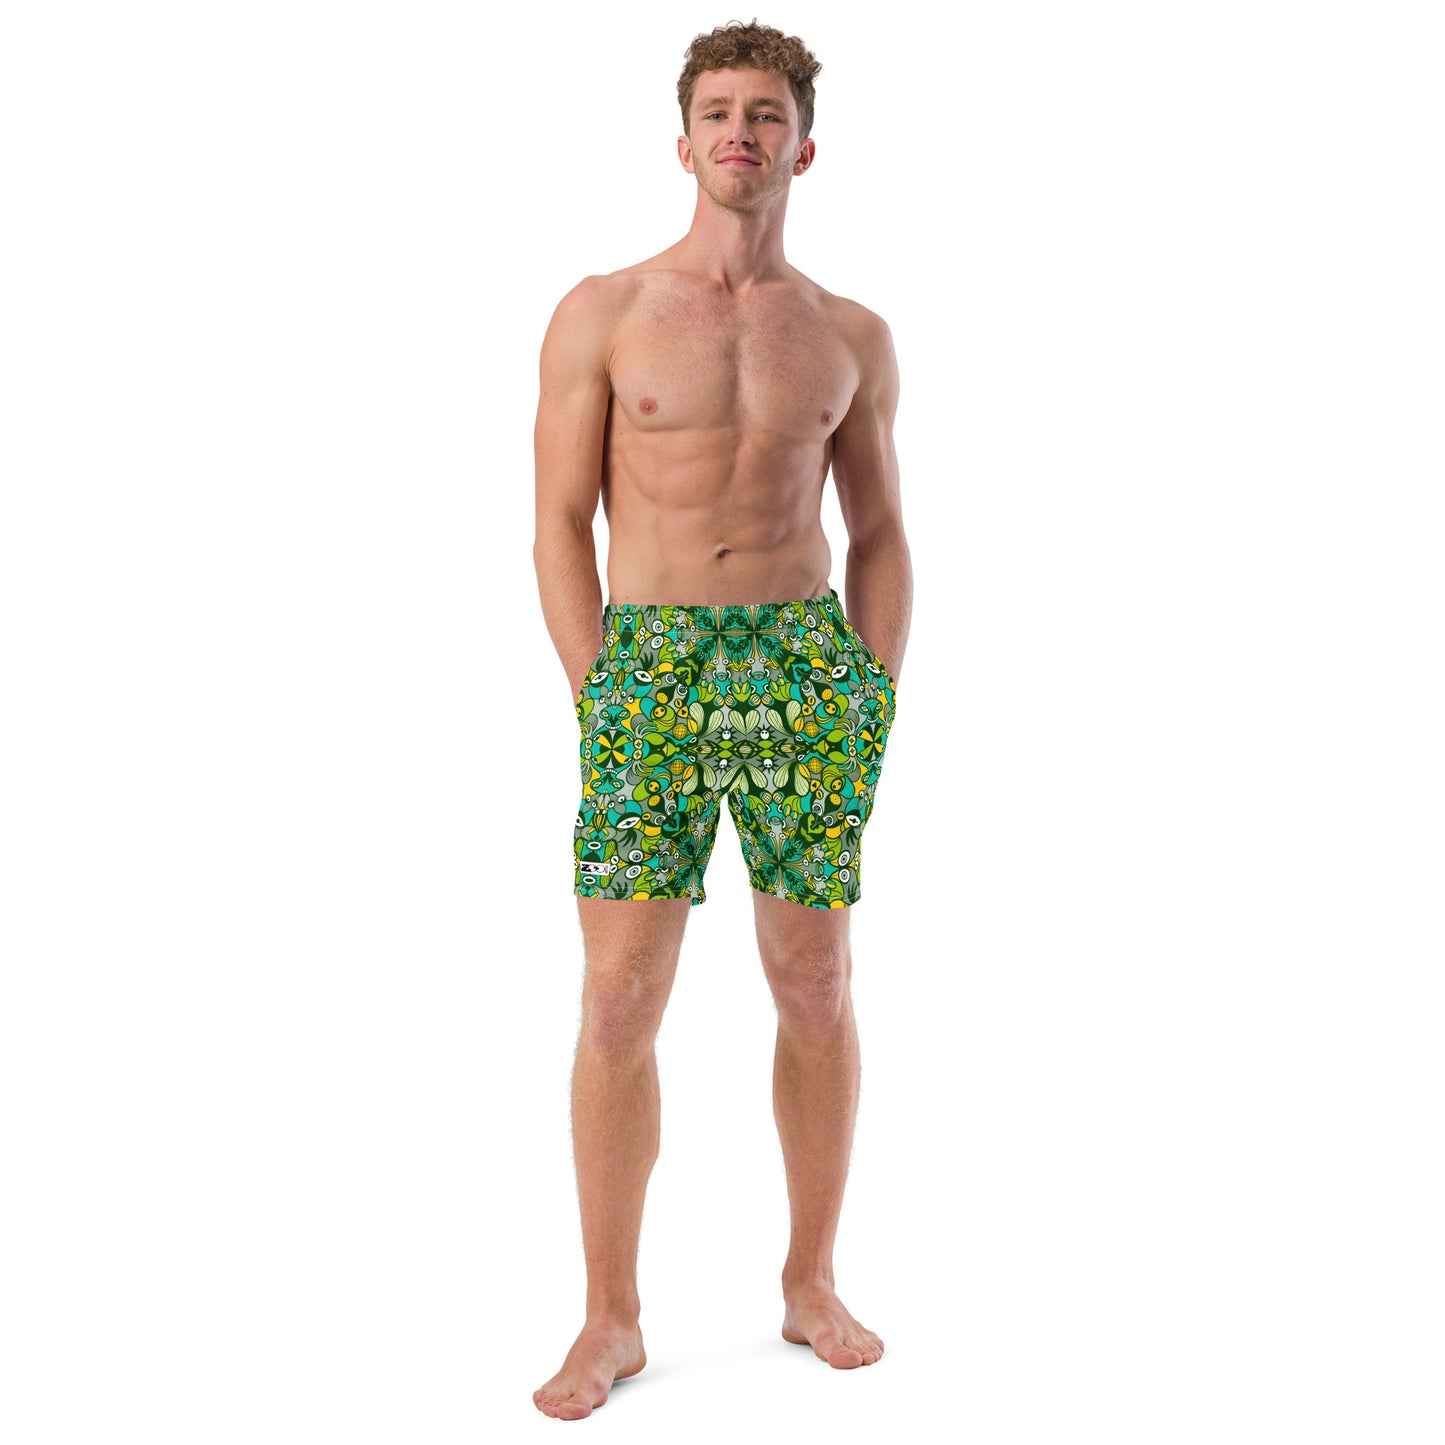 Join the funniest alien doodling network in the universe Men's swim trunks. Young man wearing Zoo&co's Swim trunks